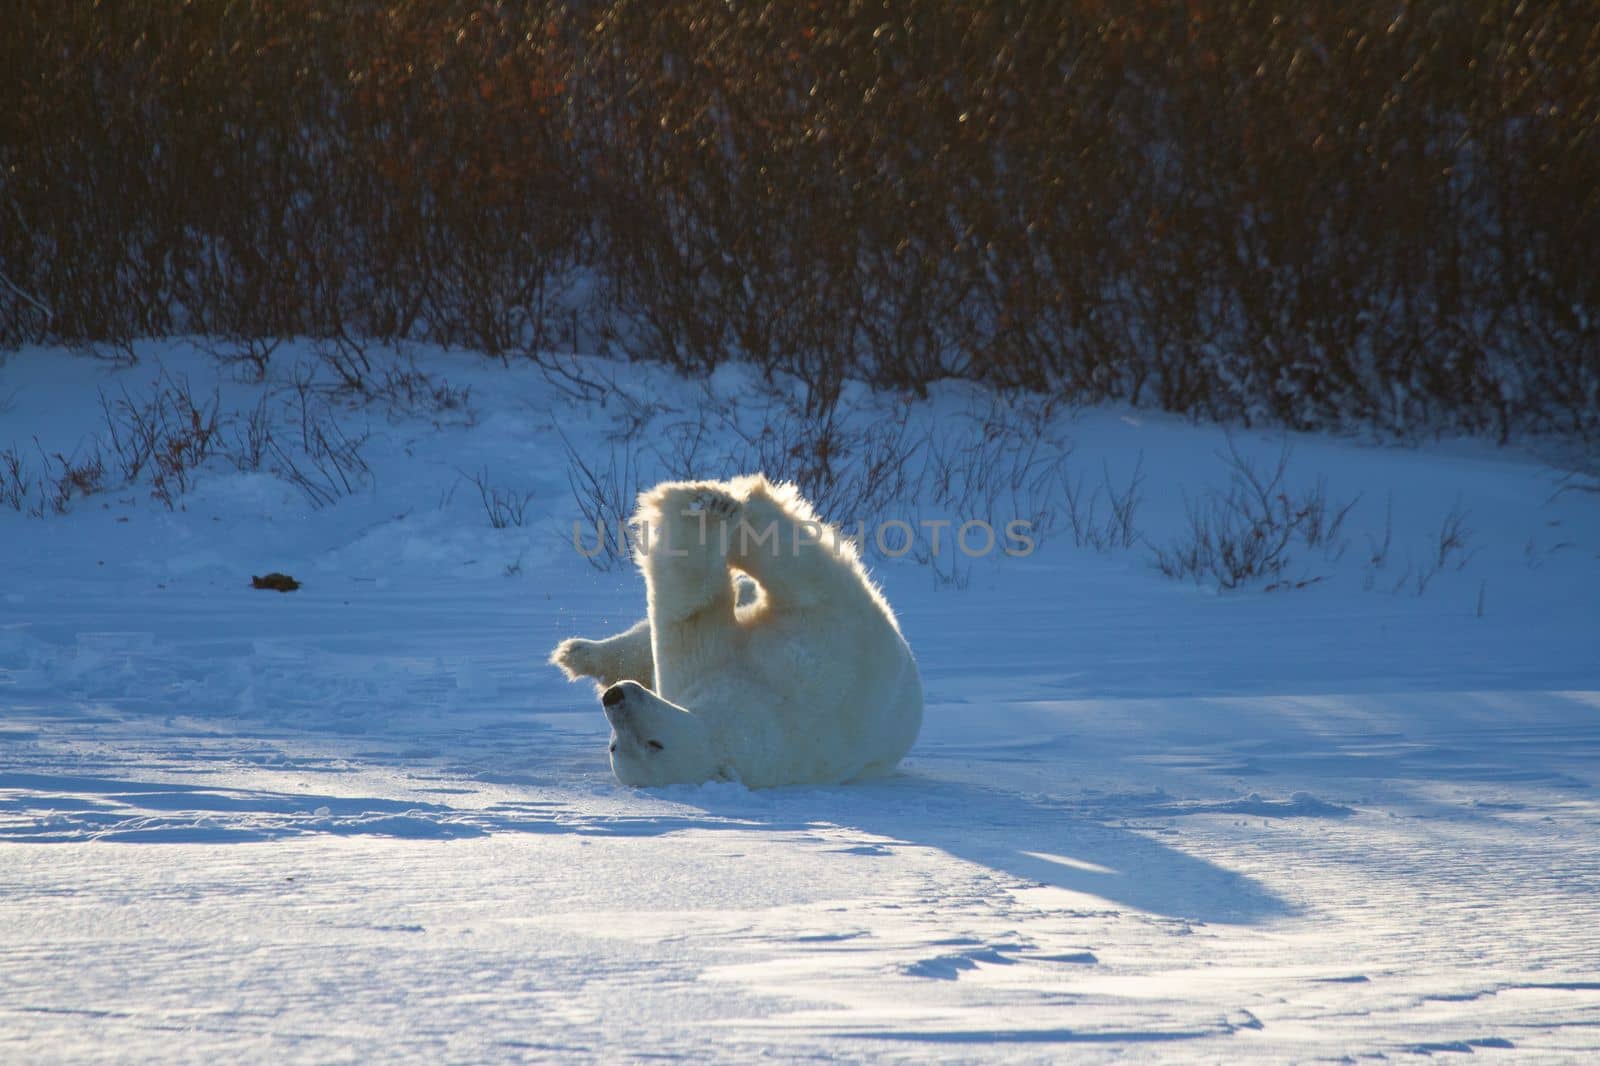 A polar bear rolling around in snow with legs in the air, with snow on the ground and willows in the background, near Churchill, Manitoba Canada